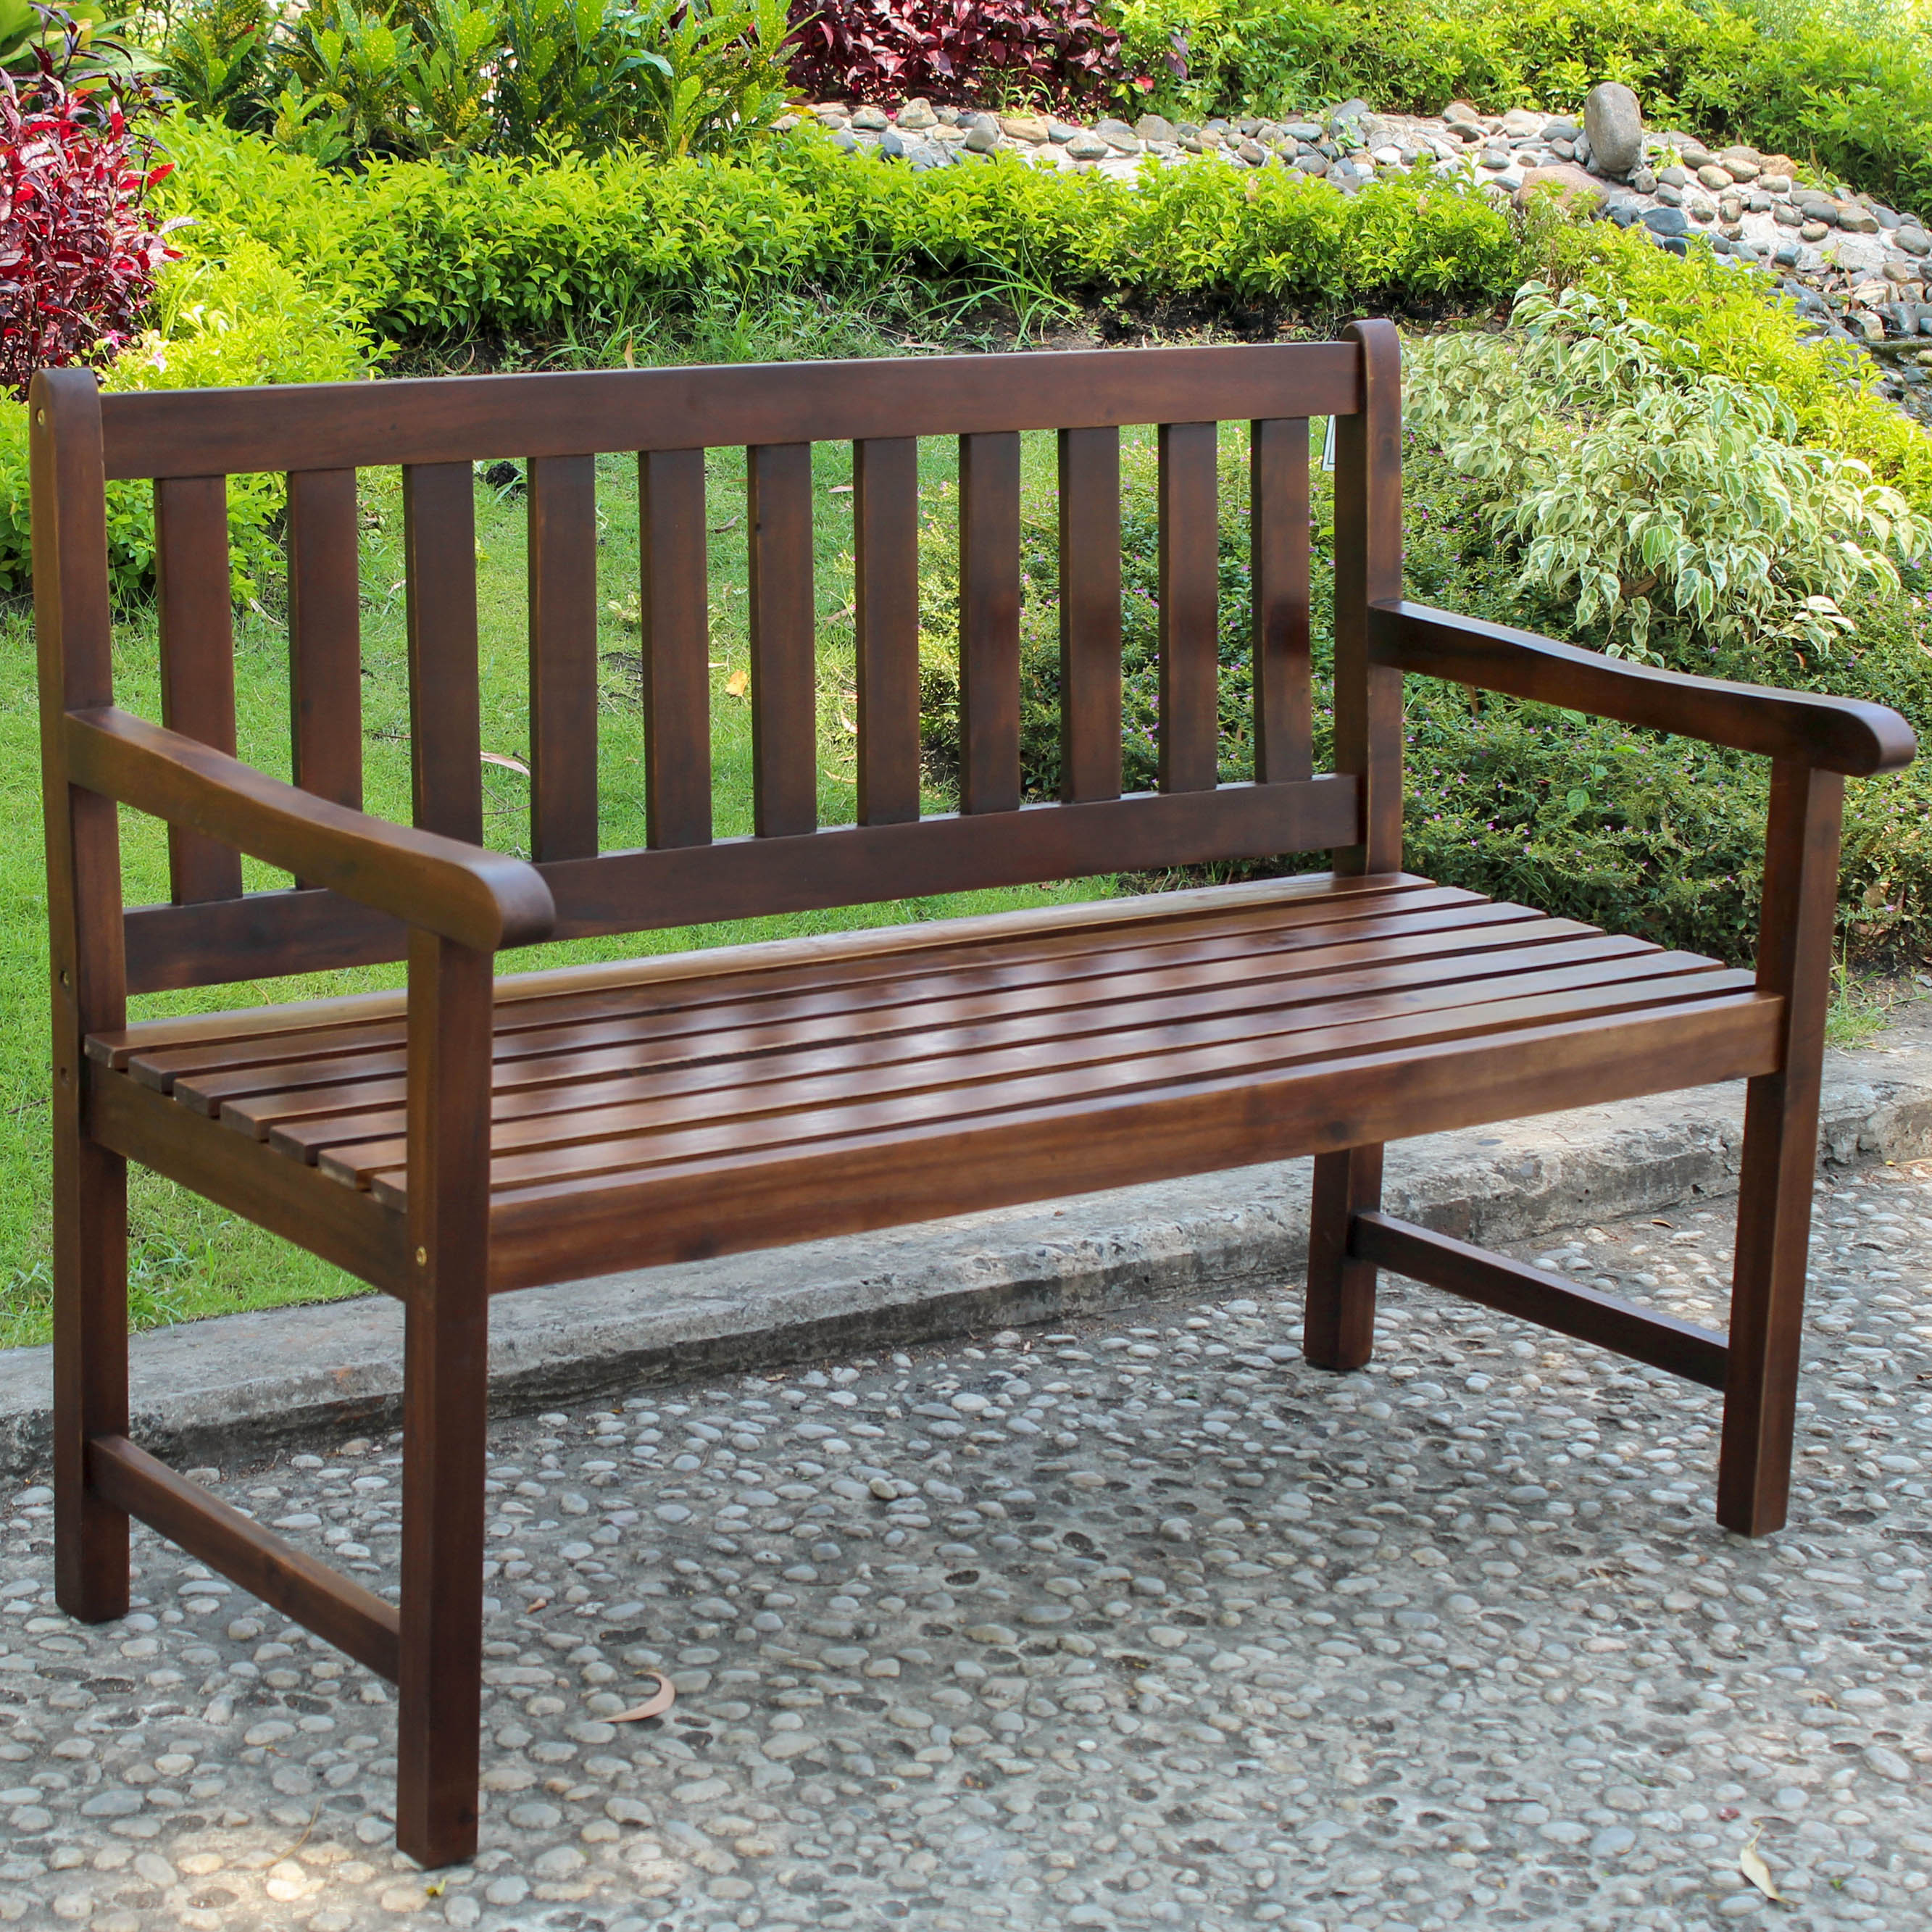 International Caravan Highland Acacia Stain 48.25 in. Patio Park Bench - image 2 of 3